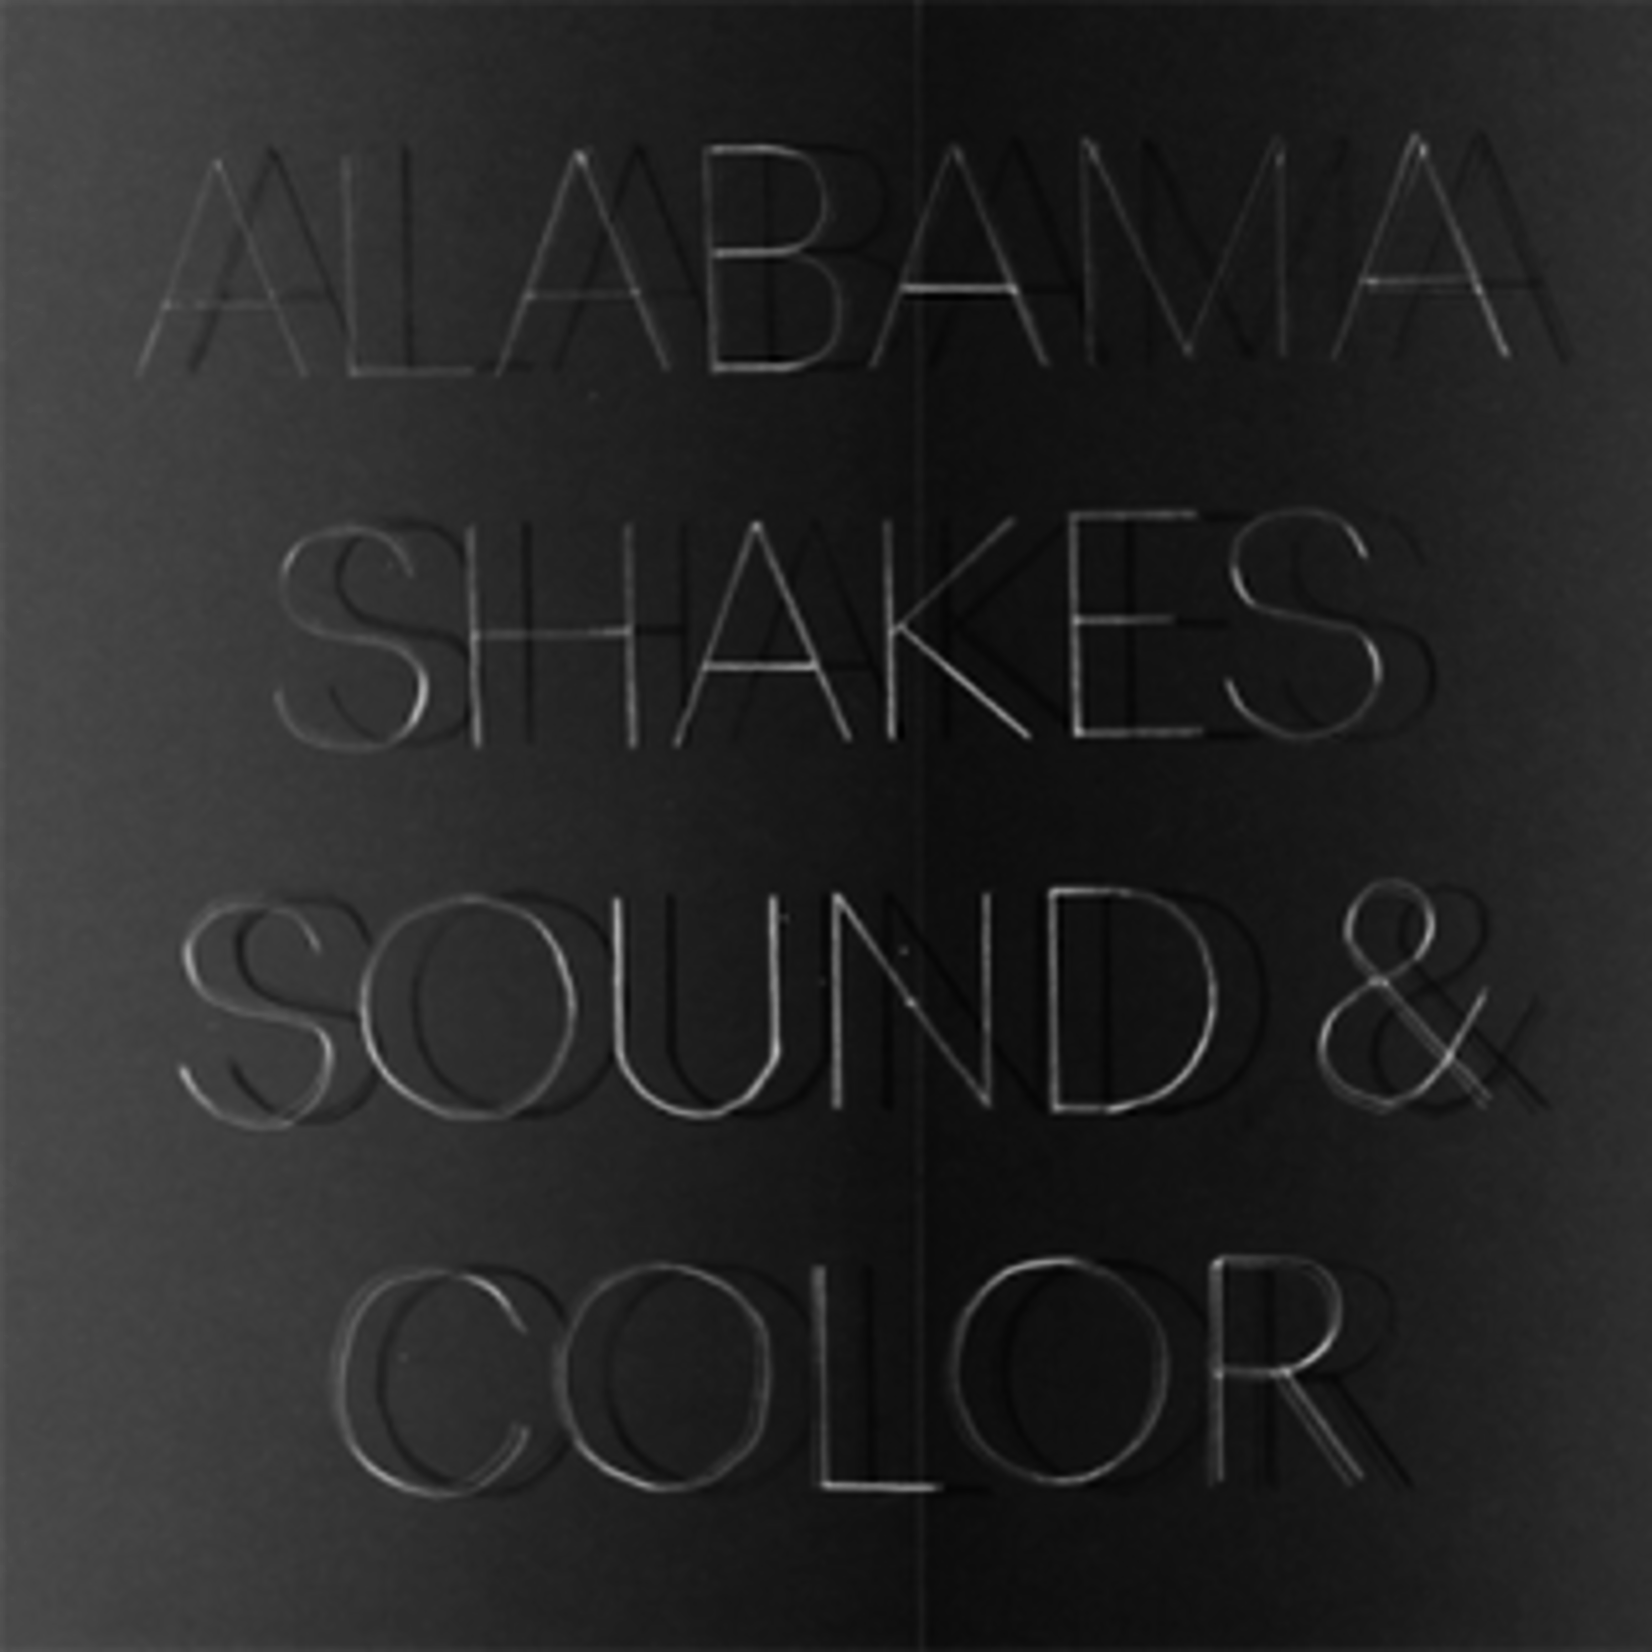 [New] Alabama Shakes - Sound & Color (2LP, deluxe)